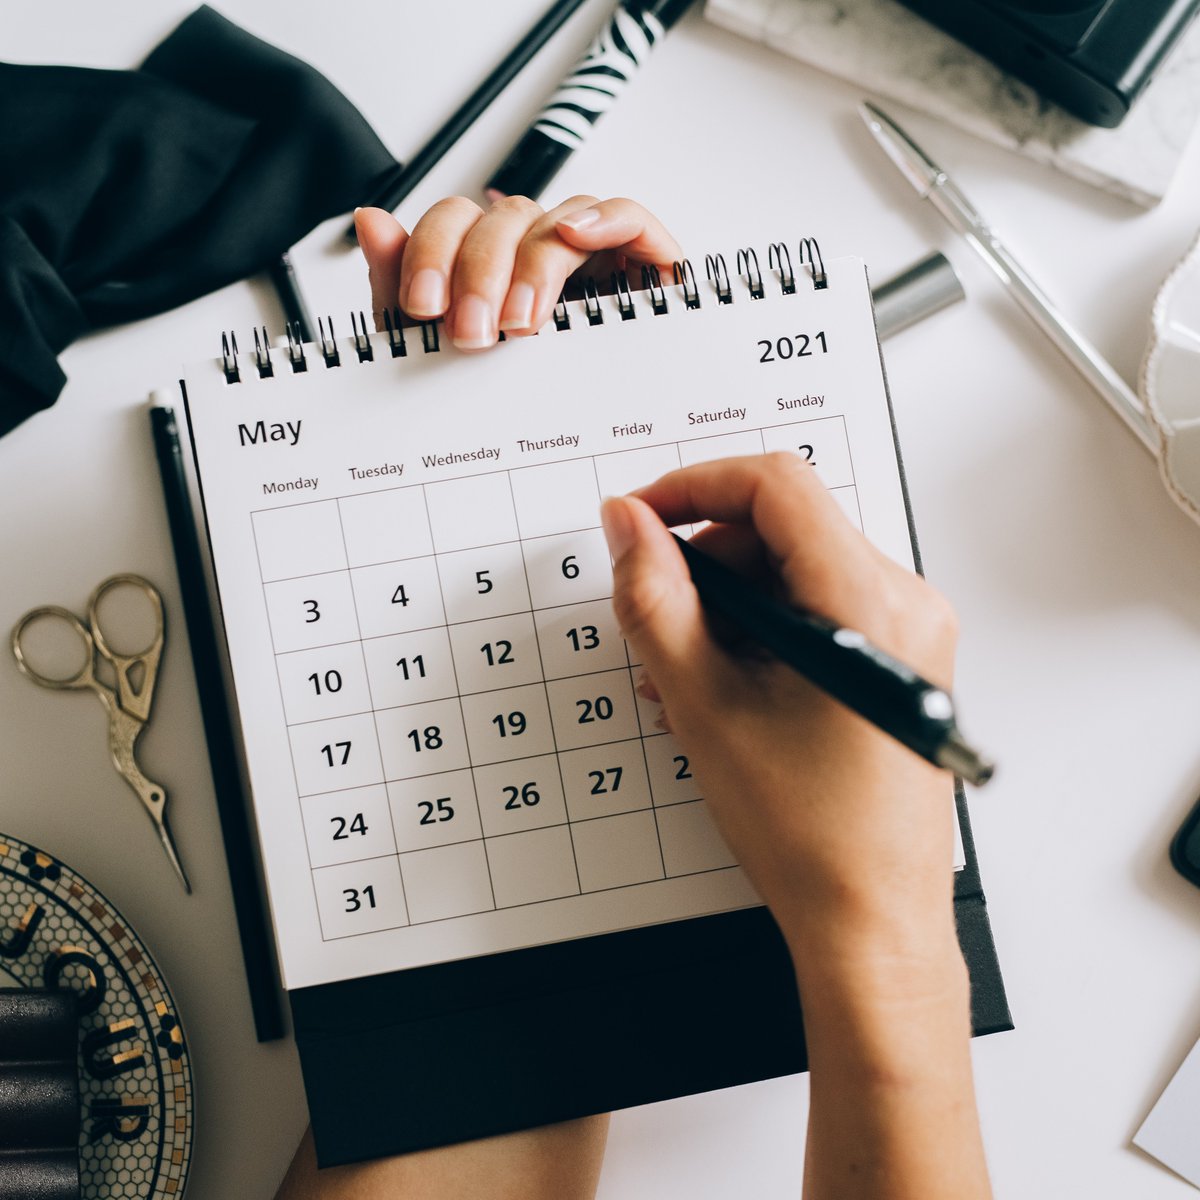 Stay organized and prepared with a new monthly calendar found on our website, check it out!

#calendar #calendargirl #organized #organizedlife #organizedliving #organizedcalendar #newcalendar #dailycalendar #monthlycalendar